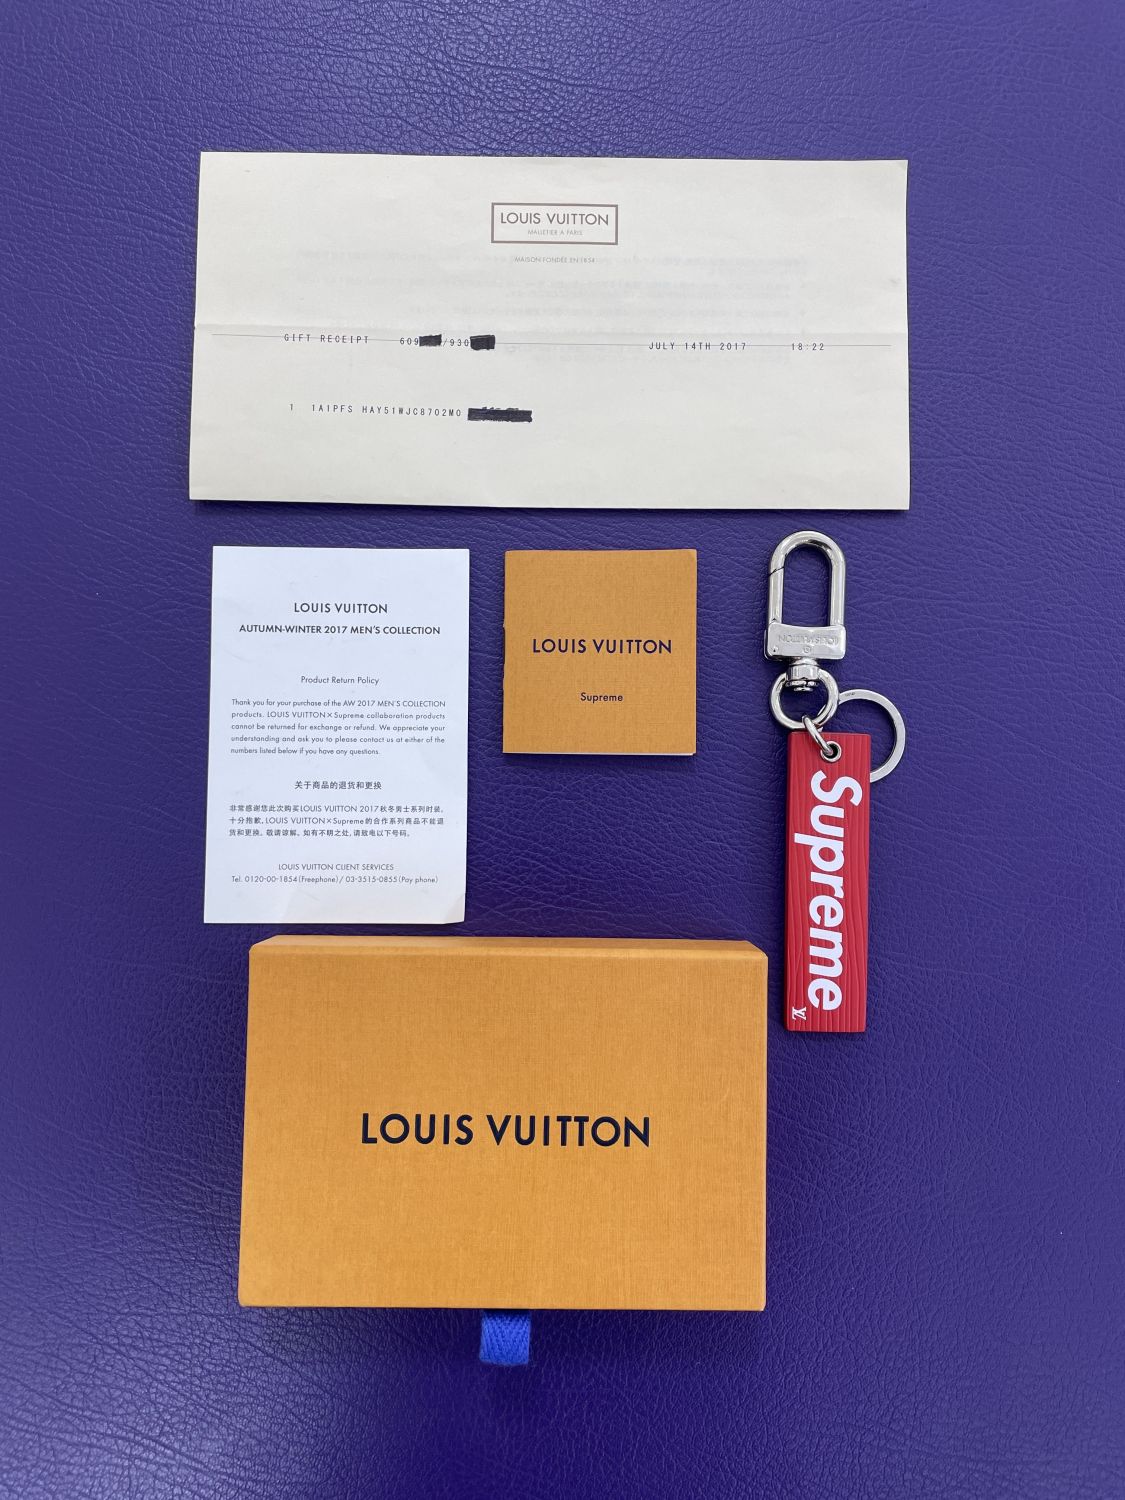 Louis Vuitton x Supreme Epi Keychain “Red” for Sale in New York